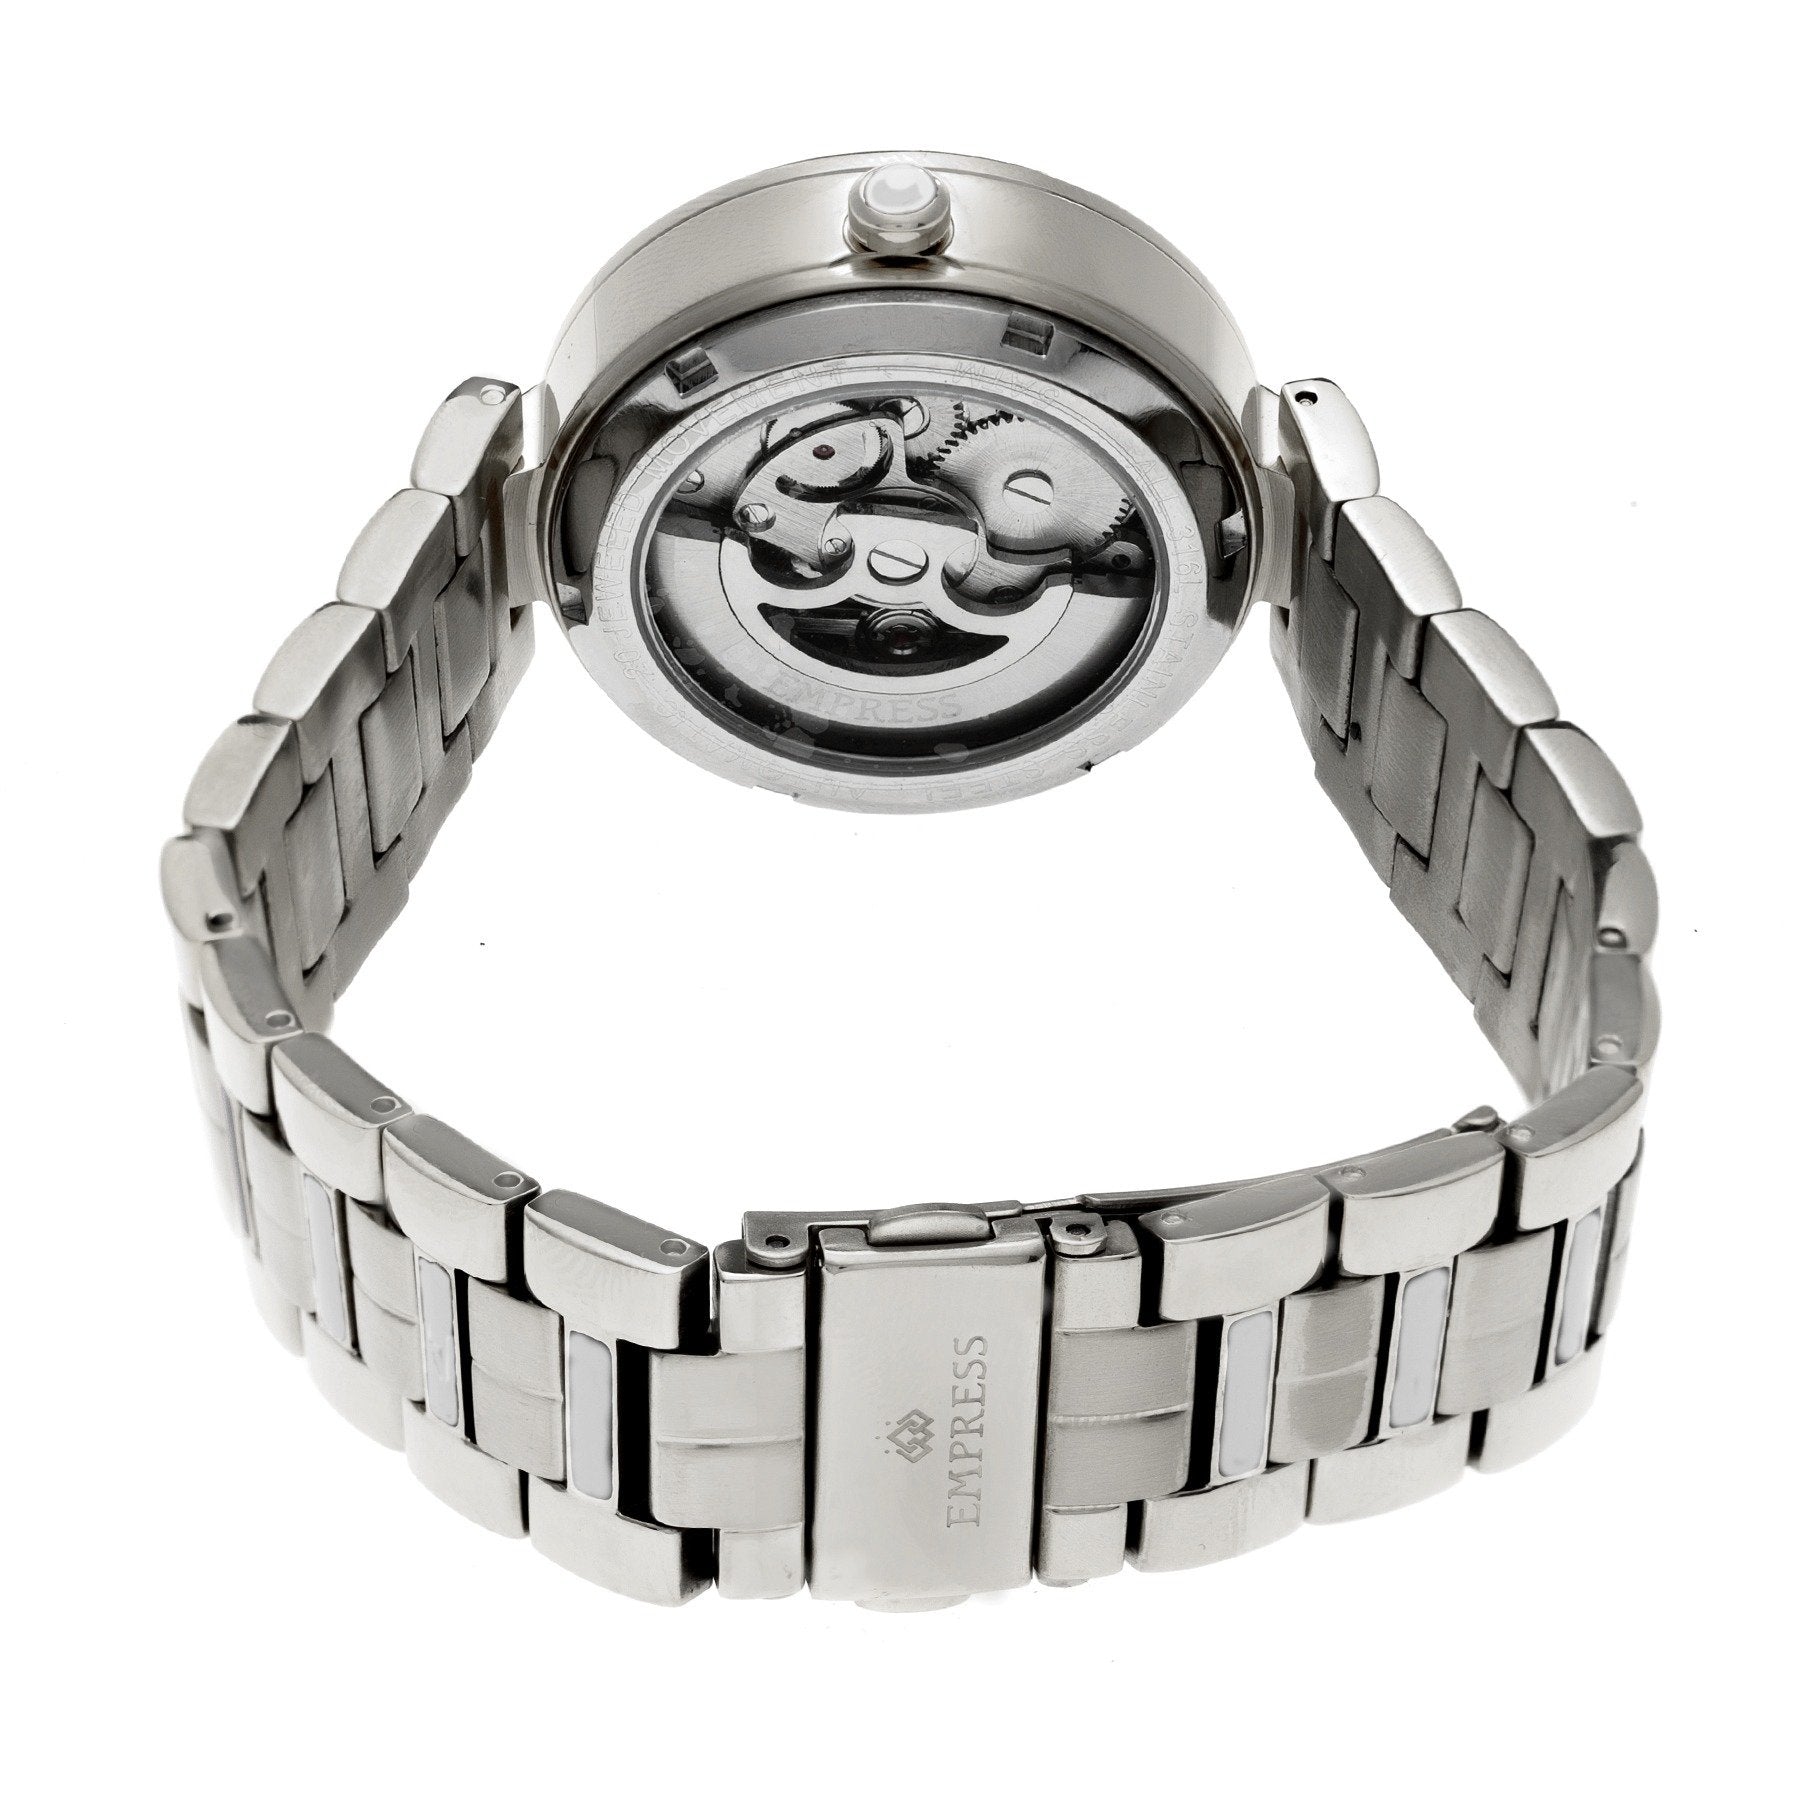 Empress Catherine Automatic Hammered Dial Bracelet Watch - Silver - EMPEM1901